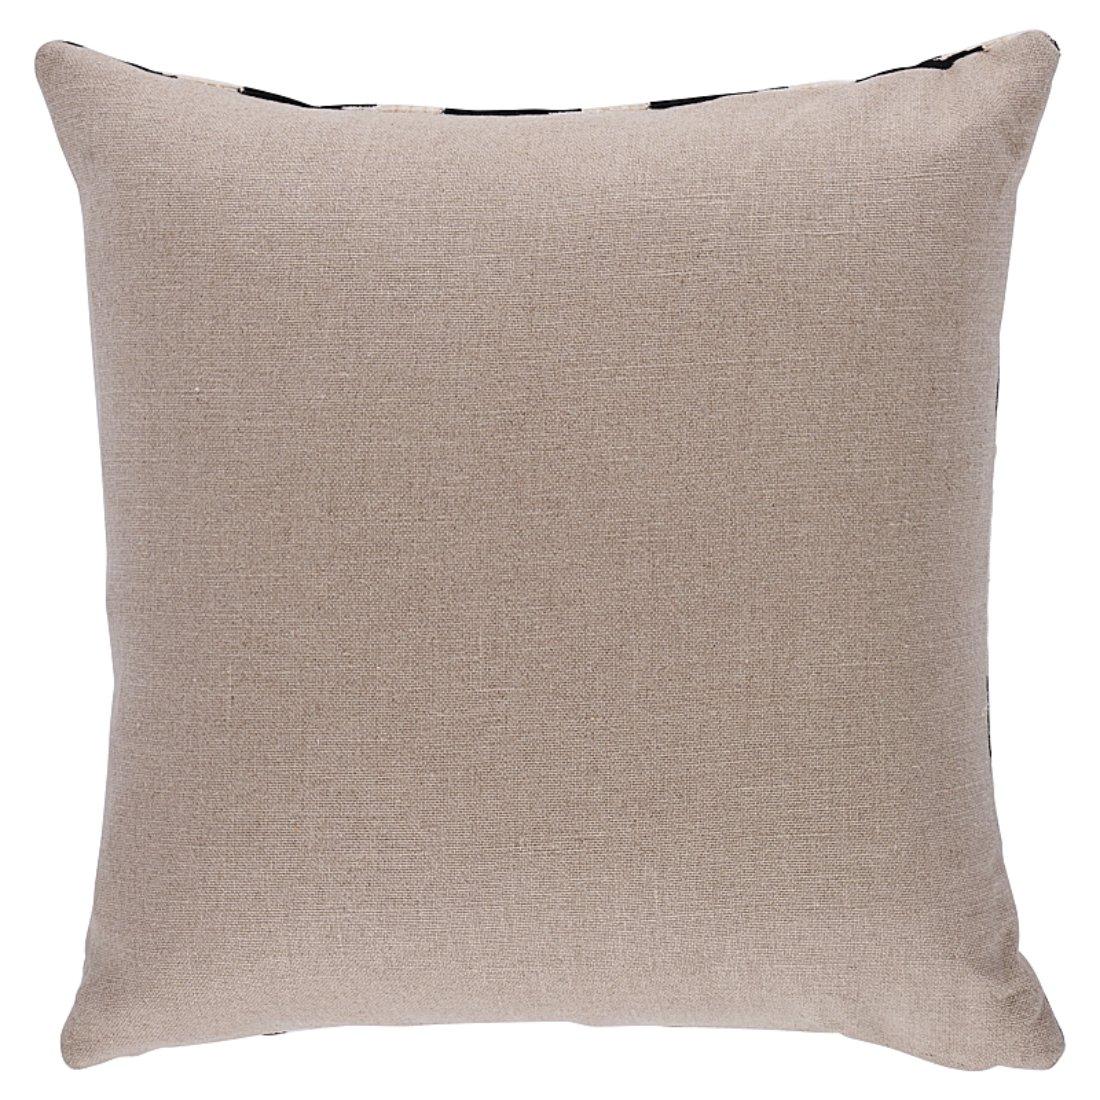 This pillow features Tutsi by David Kaihoi for Schumacher with a Knife Edge finish. A hardwearing yet sophisticated, heavyweight velvet with both cut and loop pile for added texture and depth, African motifs and subtle striations heighten its visual